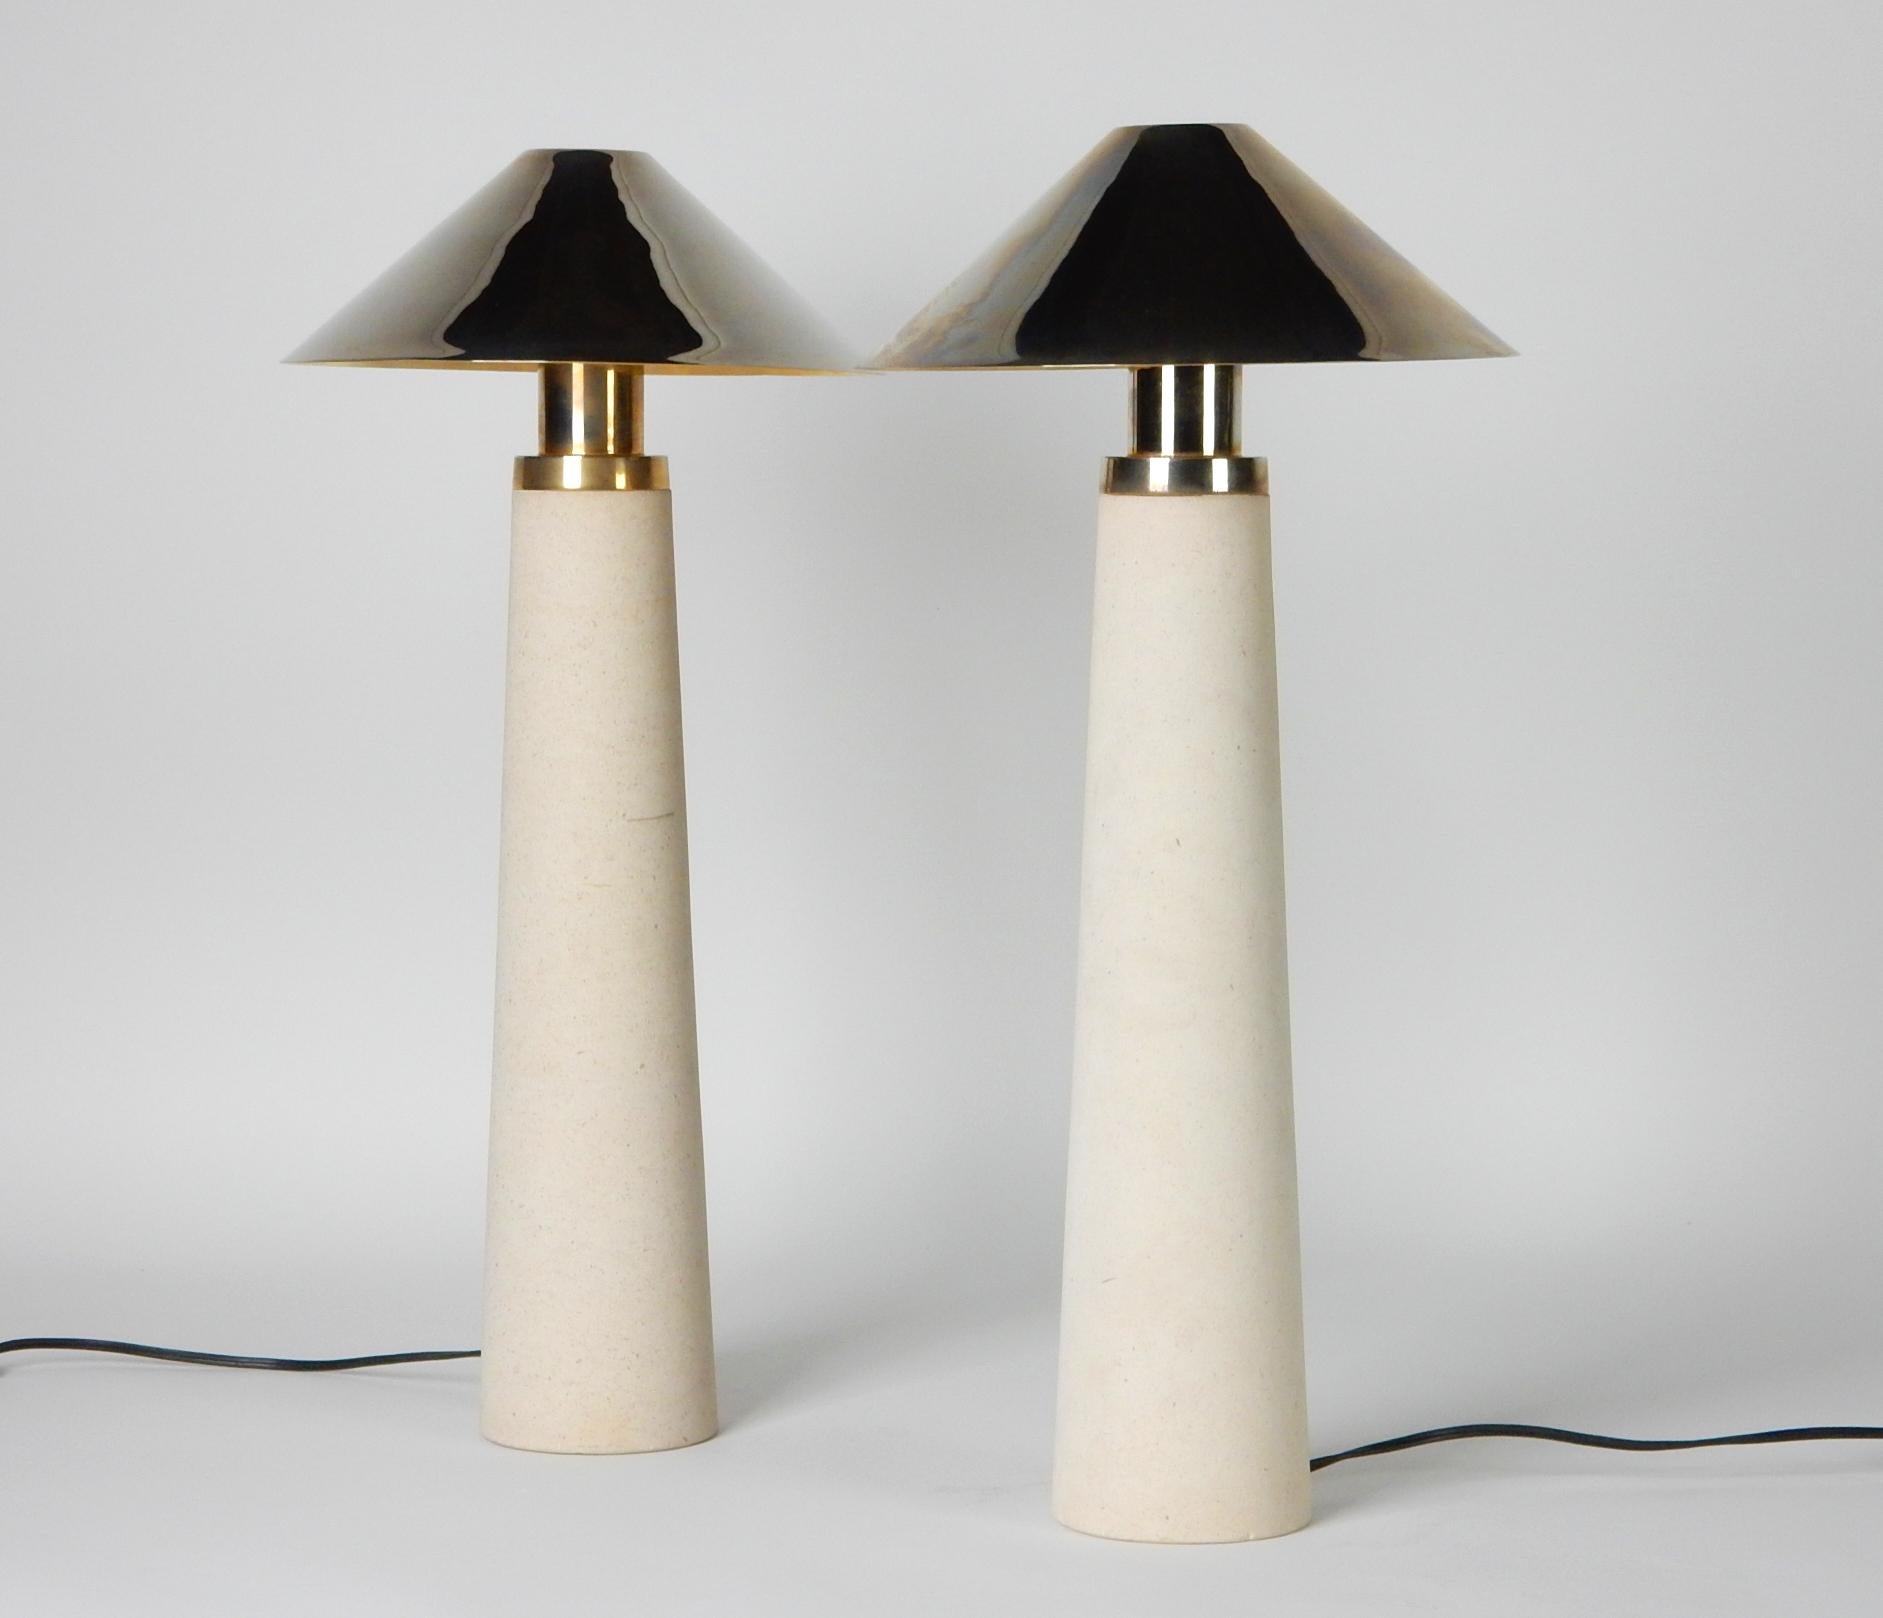 Amazing pair of stone, brass and chrome table lamps by Karl Springer.
Brass tone top cap. Brass underside of shade with mirror chrome finish on top, circa 1980s.
Mood lamps with dimmer switch in cord. Requires a single candle bulb. 
  